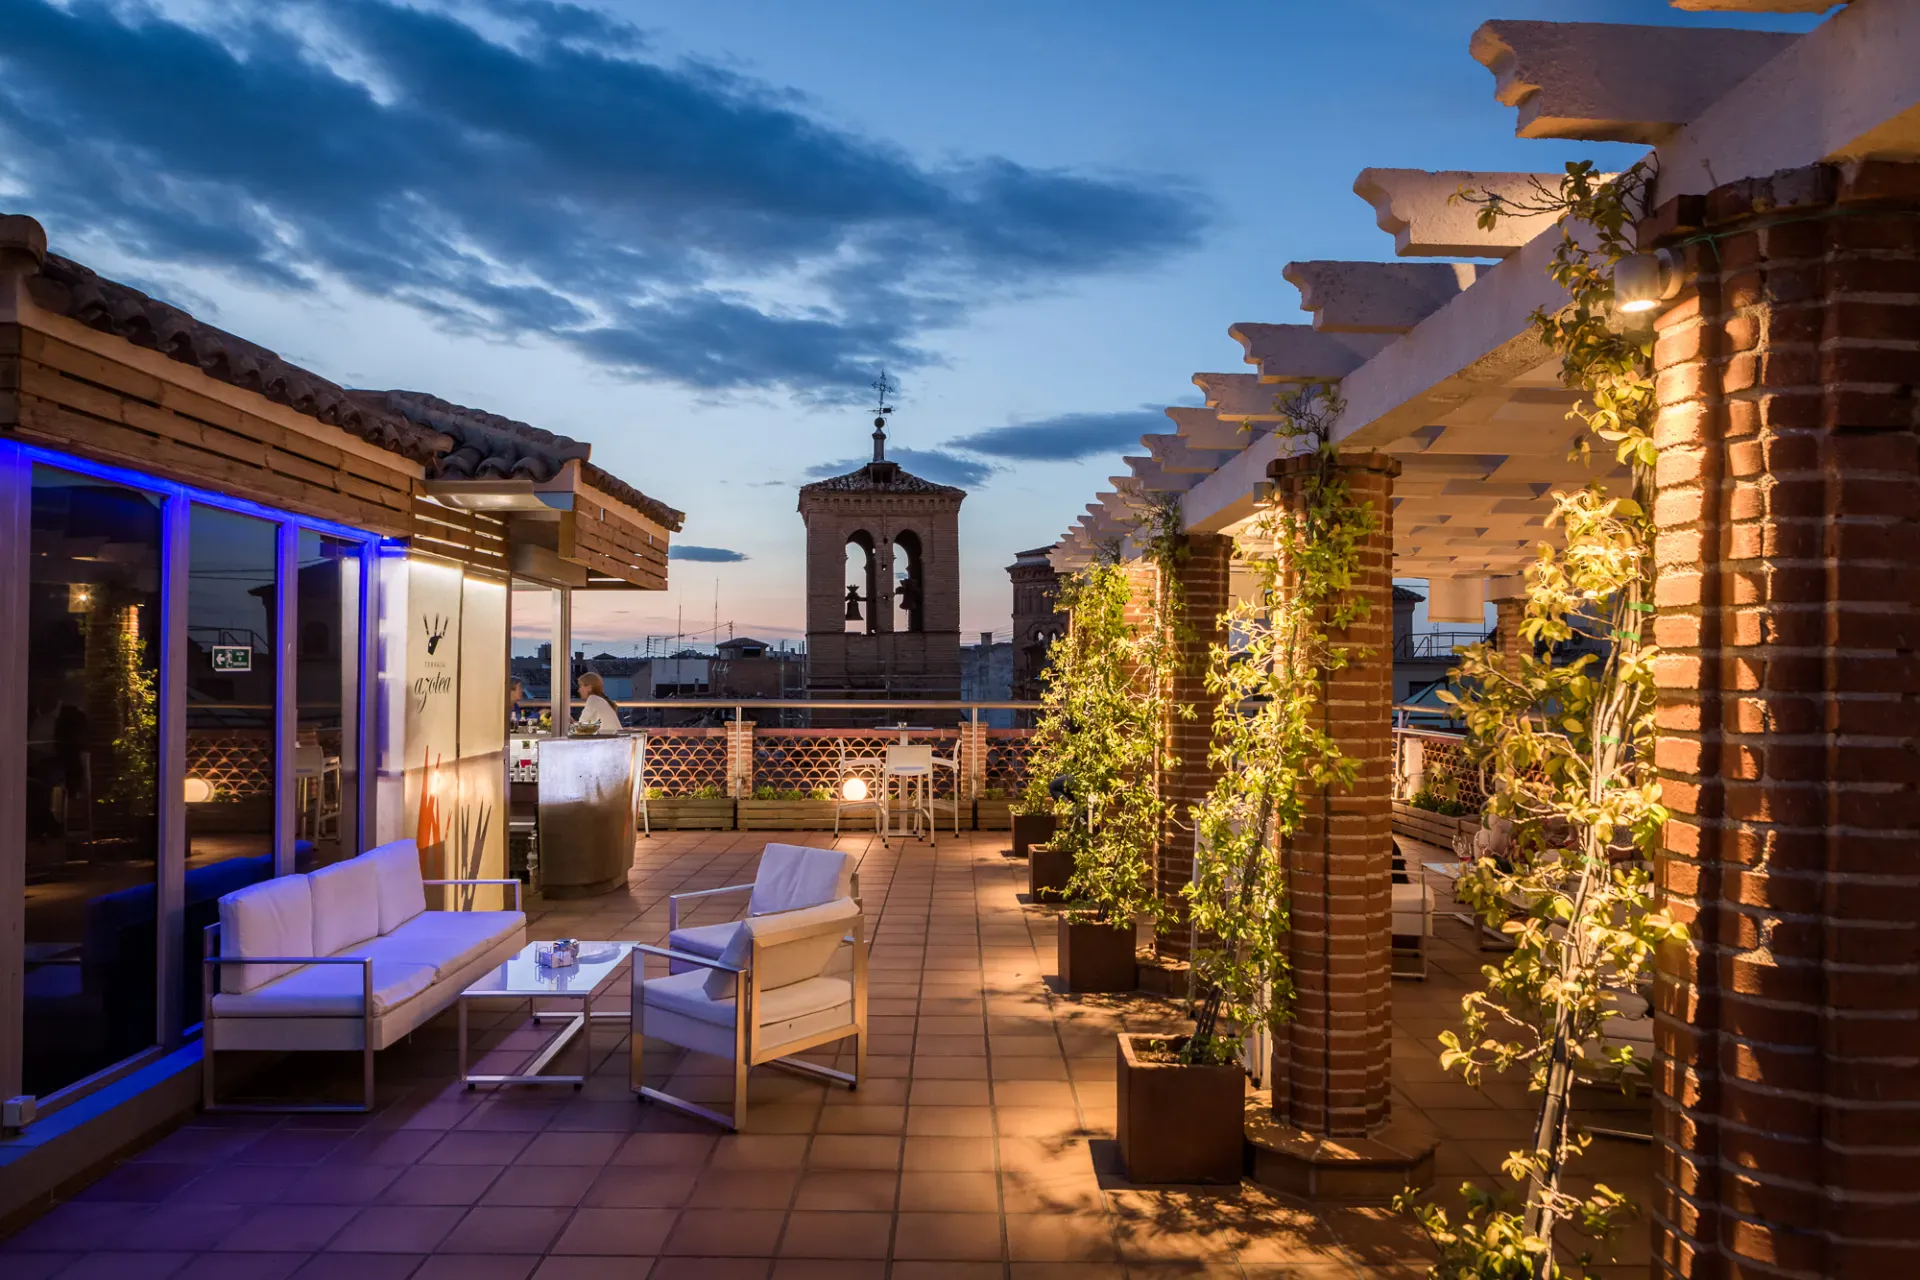 The terrace with the most spectacular views of the city